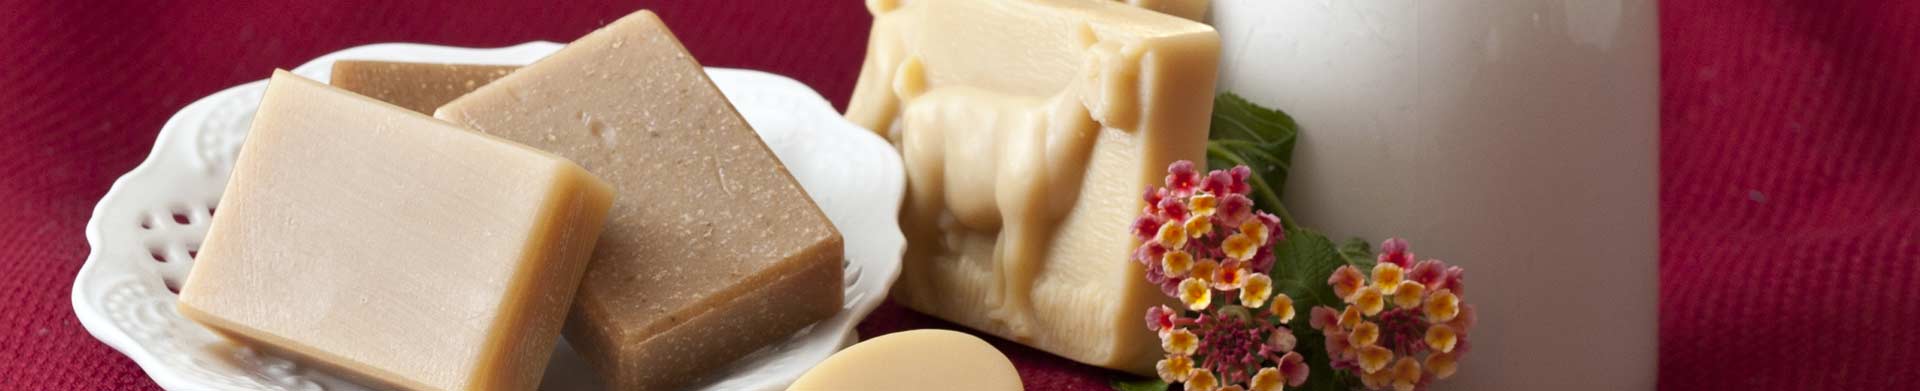 Dairy Meadow Soaps Bars